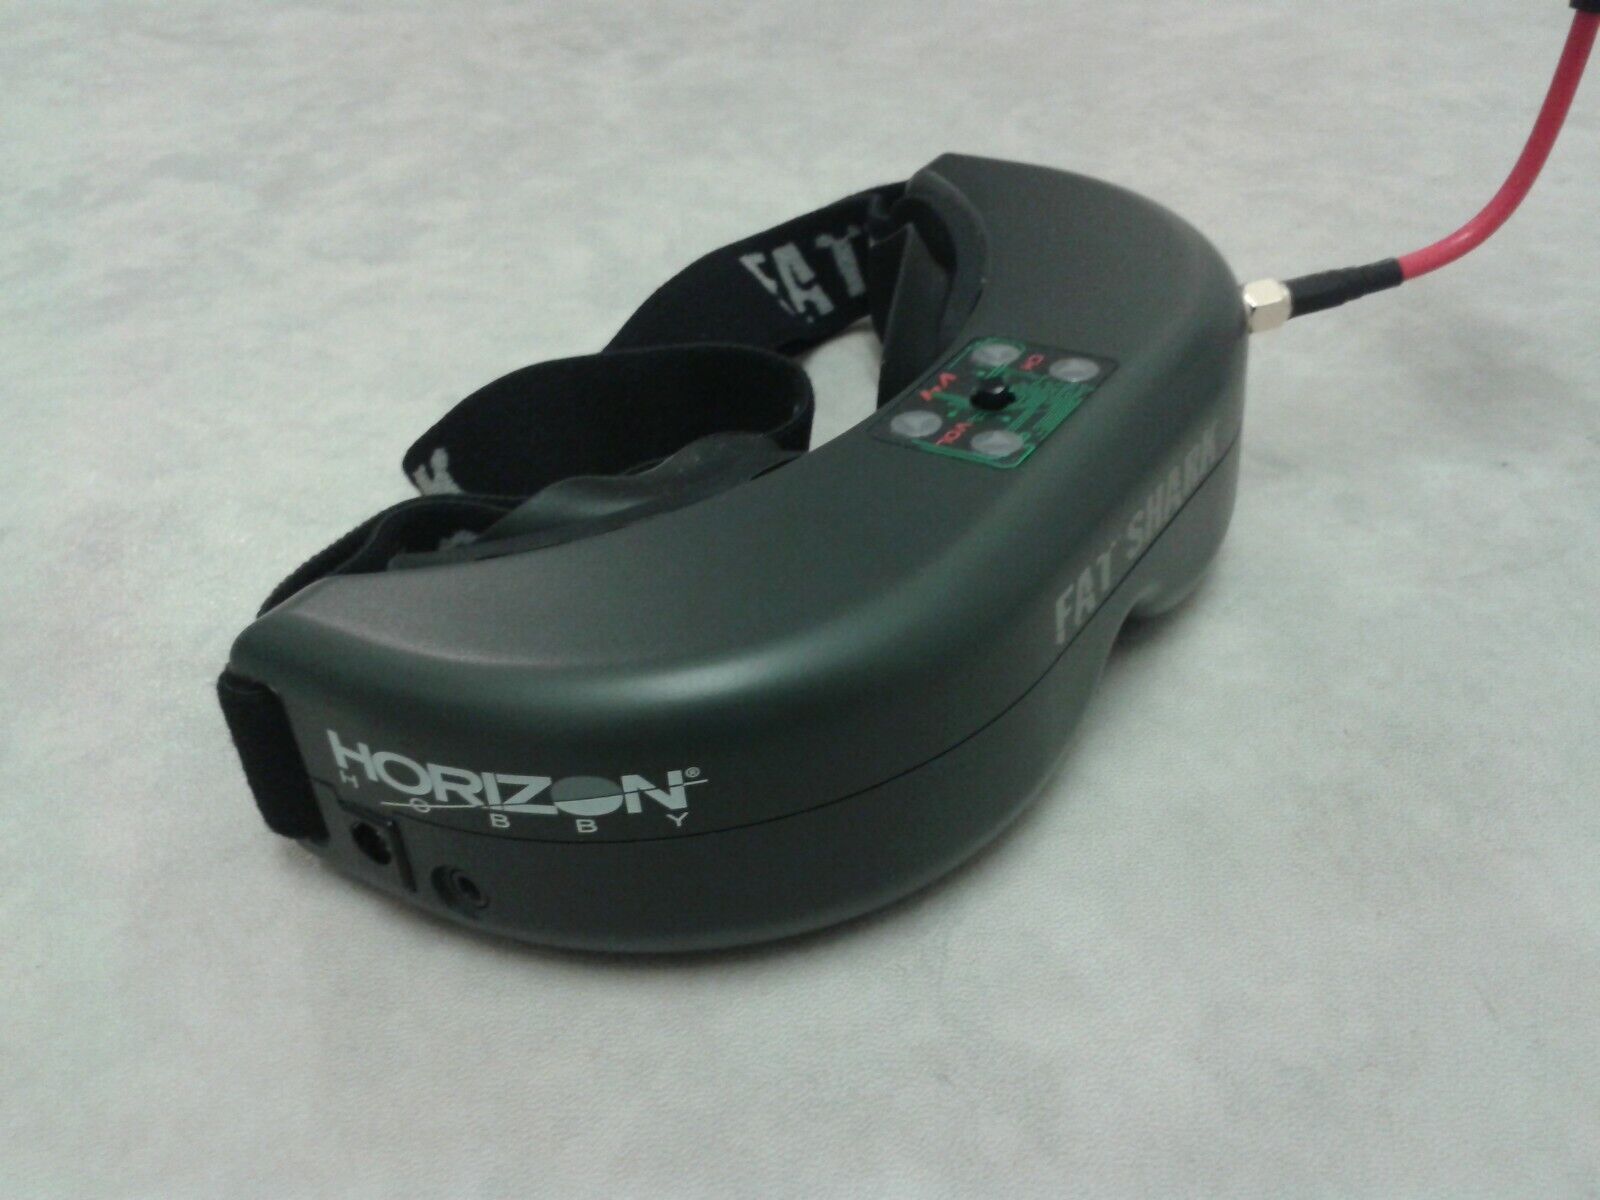 Horizon Hobby FPV Goggles for Quadcopter Drone